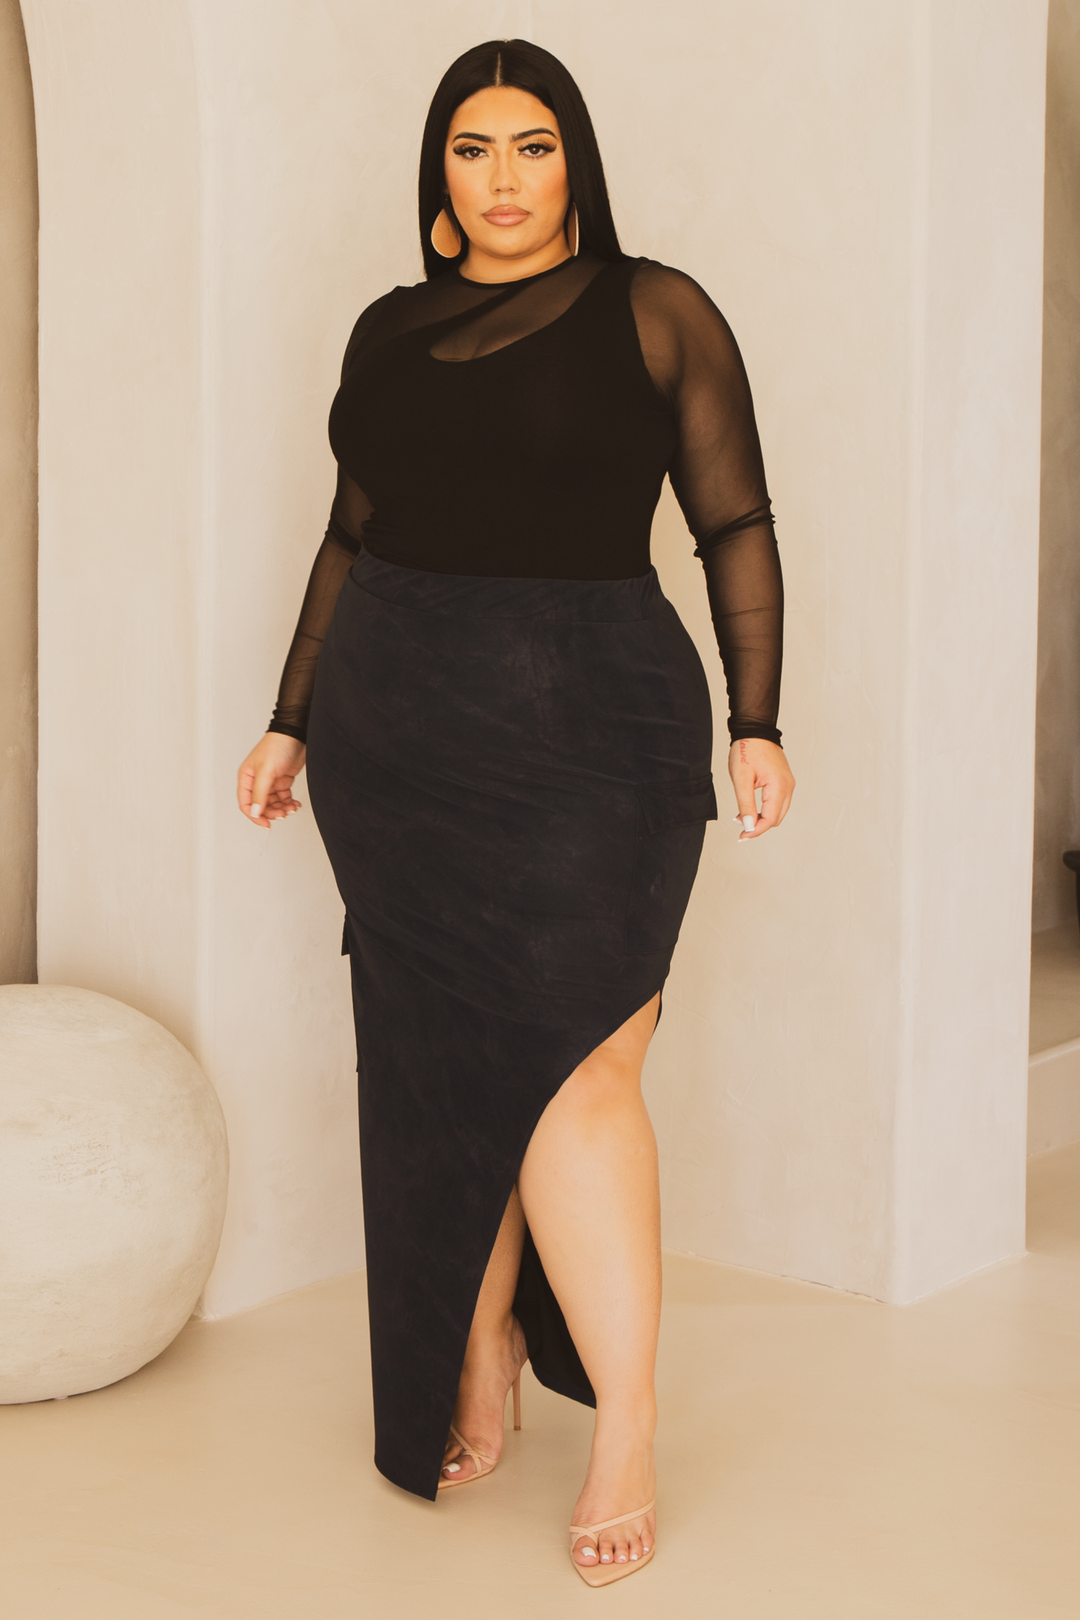 Plus Size Skirts for Curvy Women